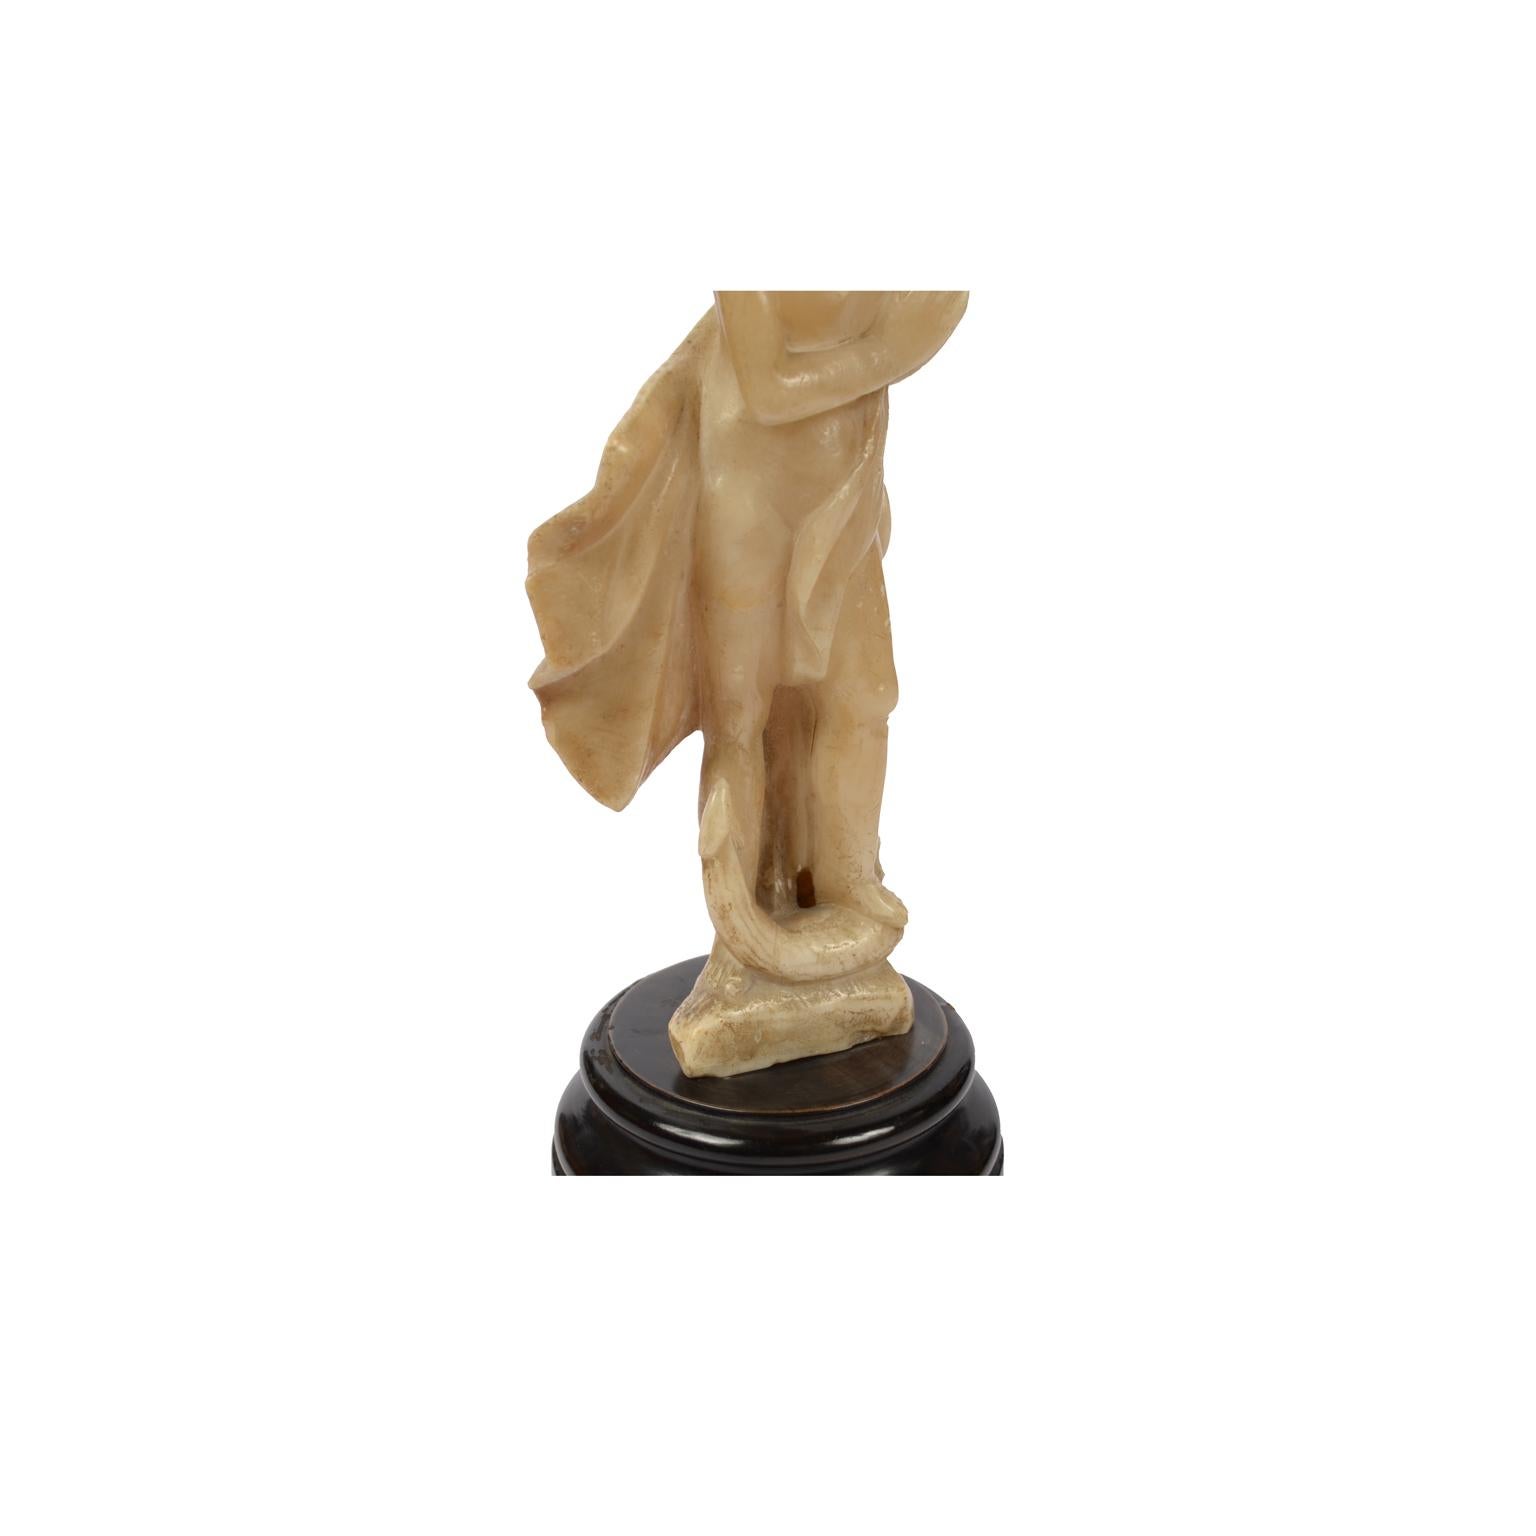 Mid-18th Century French Alabaster Sculpture Depicting a Female Nude with Anchor  For Sale 11